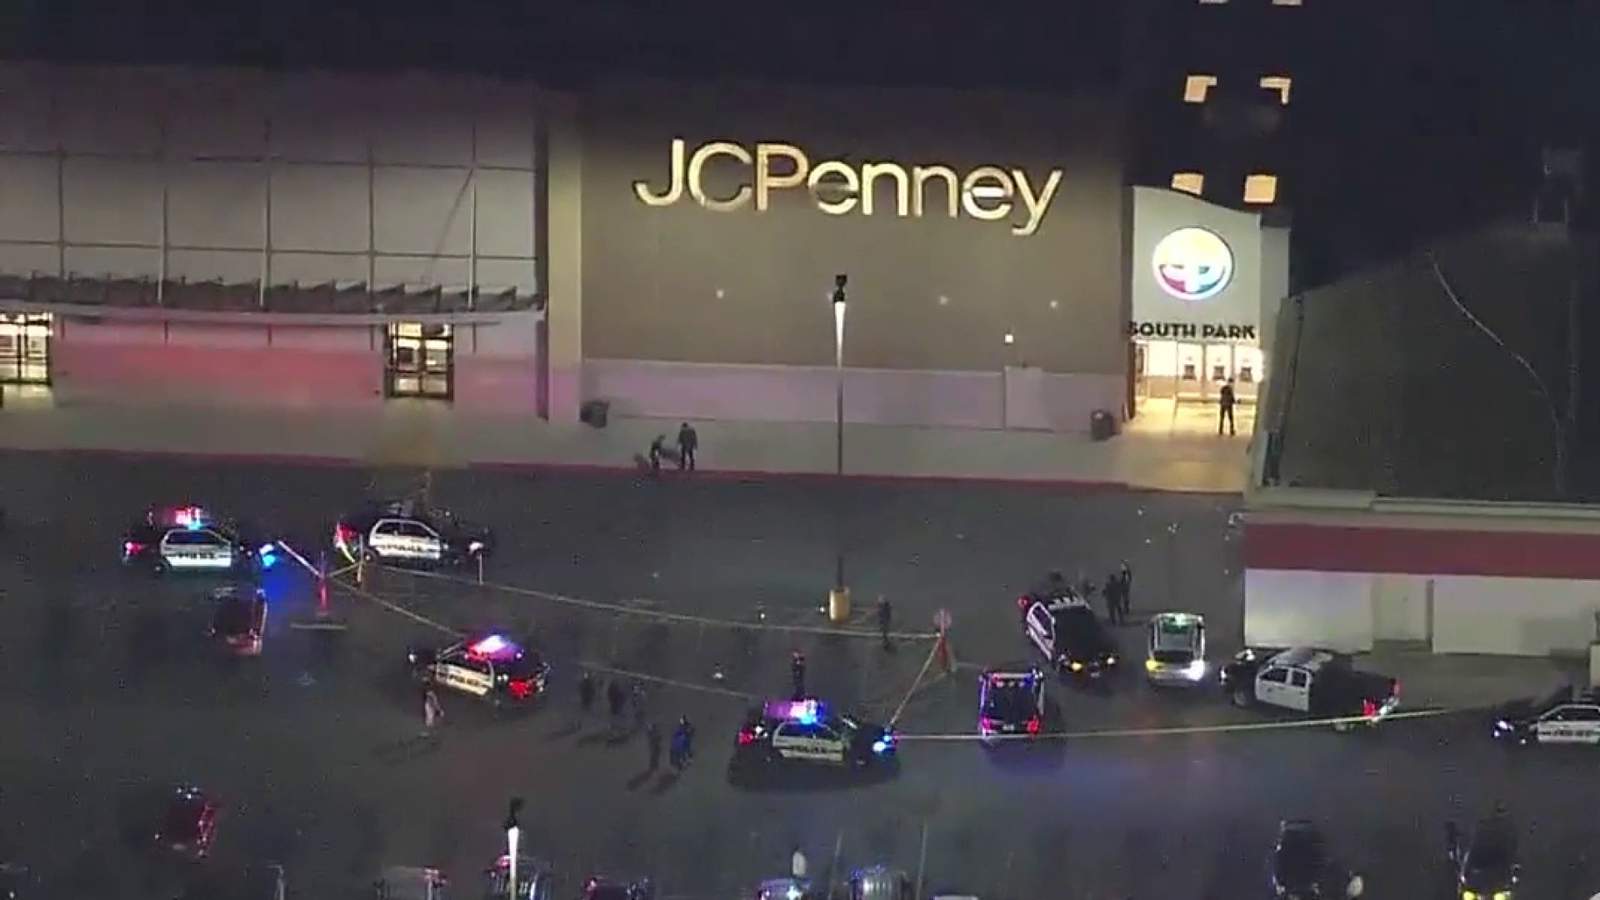 Some shoppers concerned about safety after shooting at South Park Mall